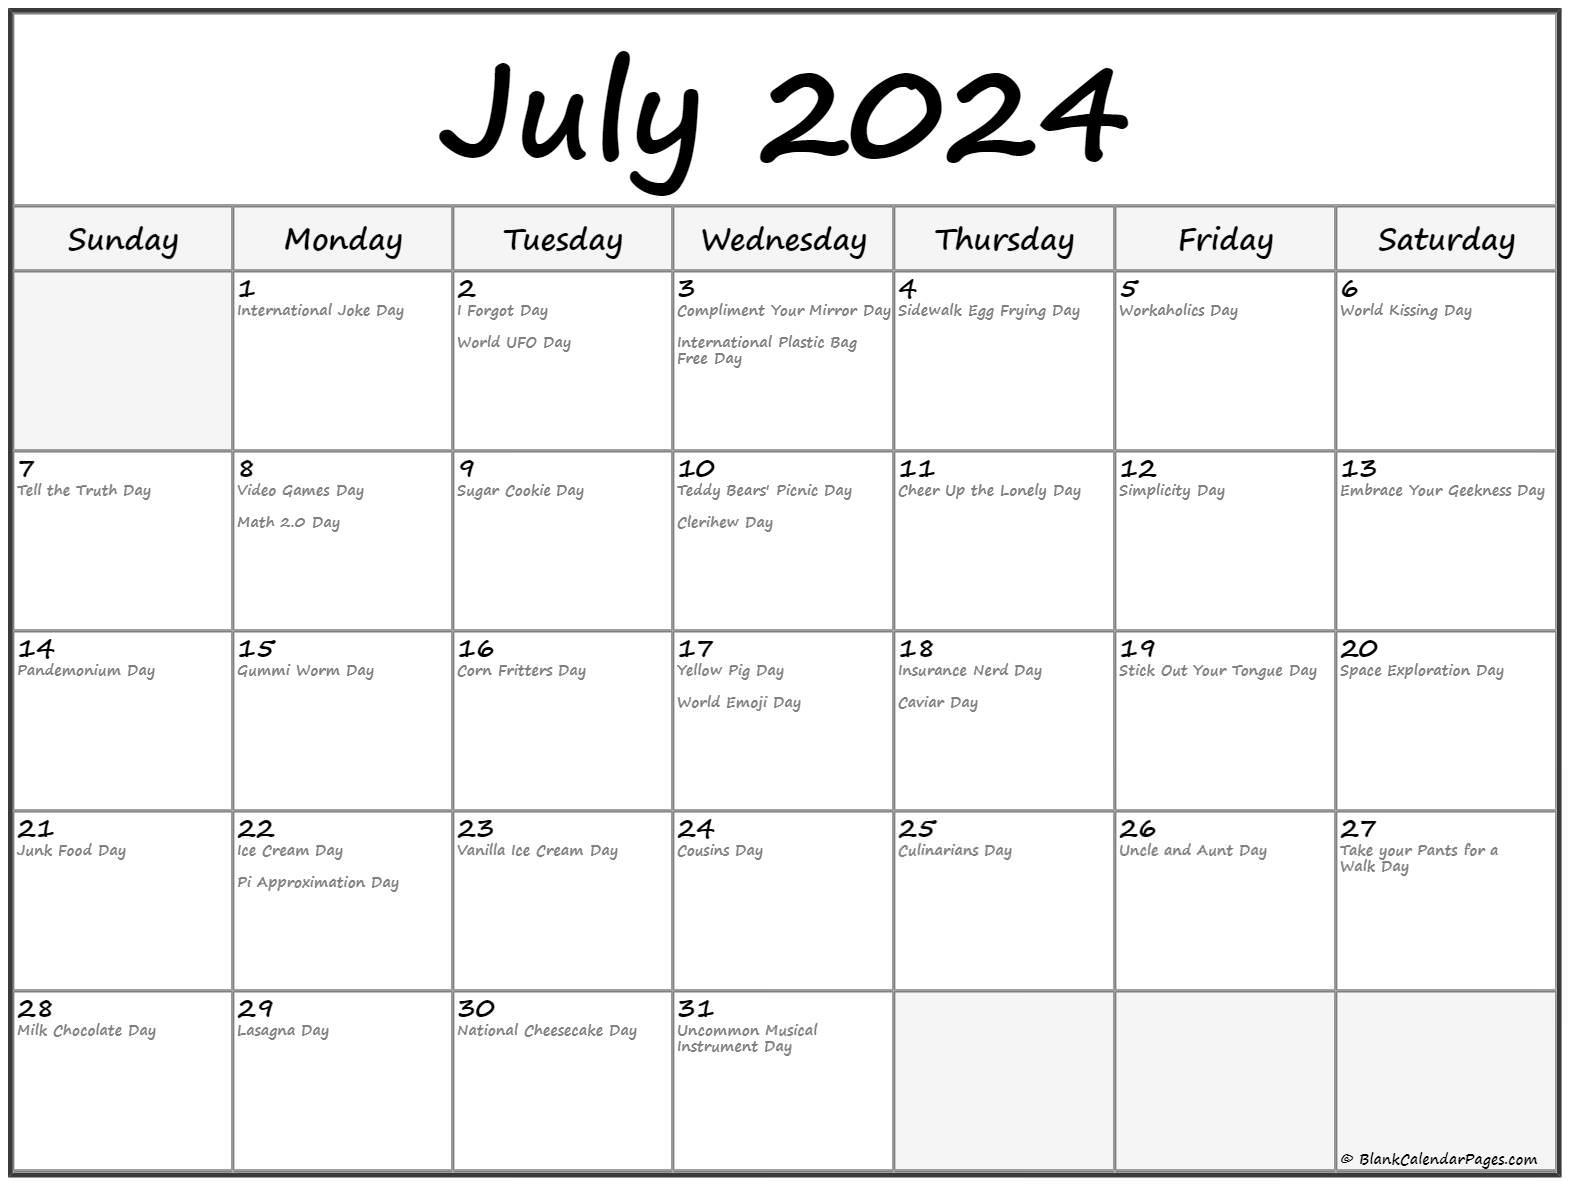 July 2024 With Holidays Calendar pertaining to July Calendar Special Days 2024